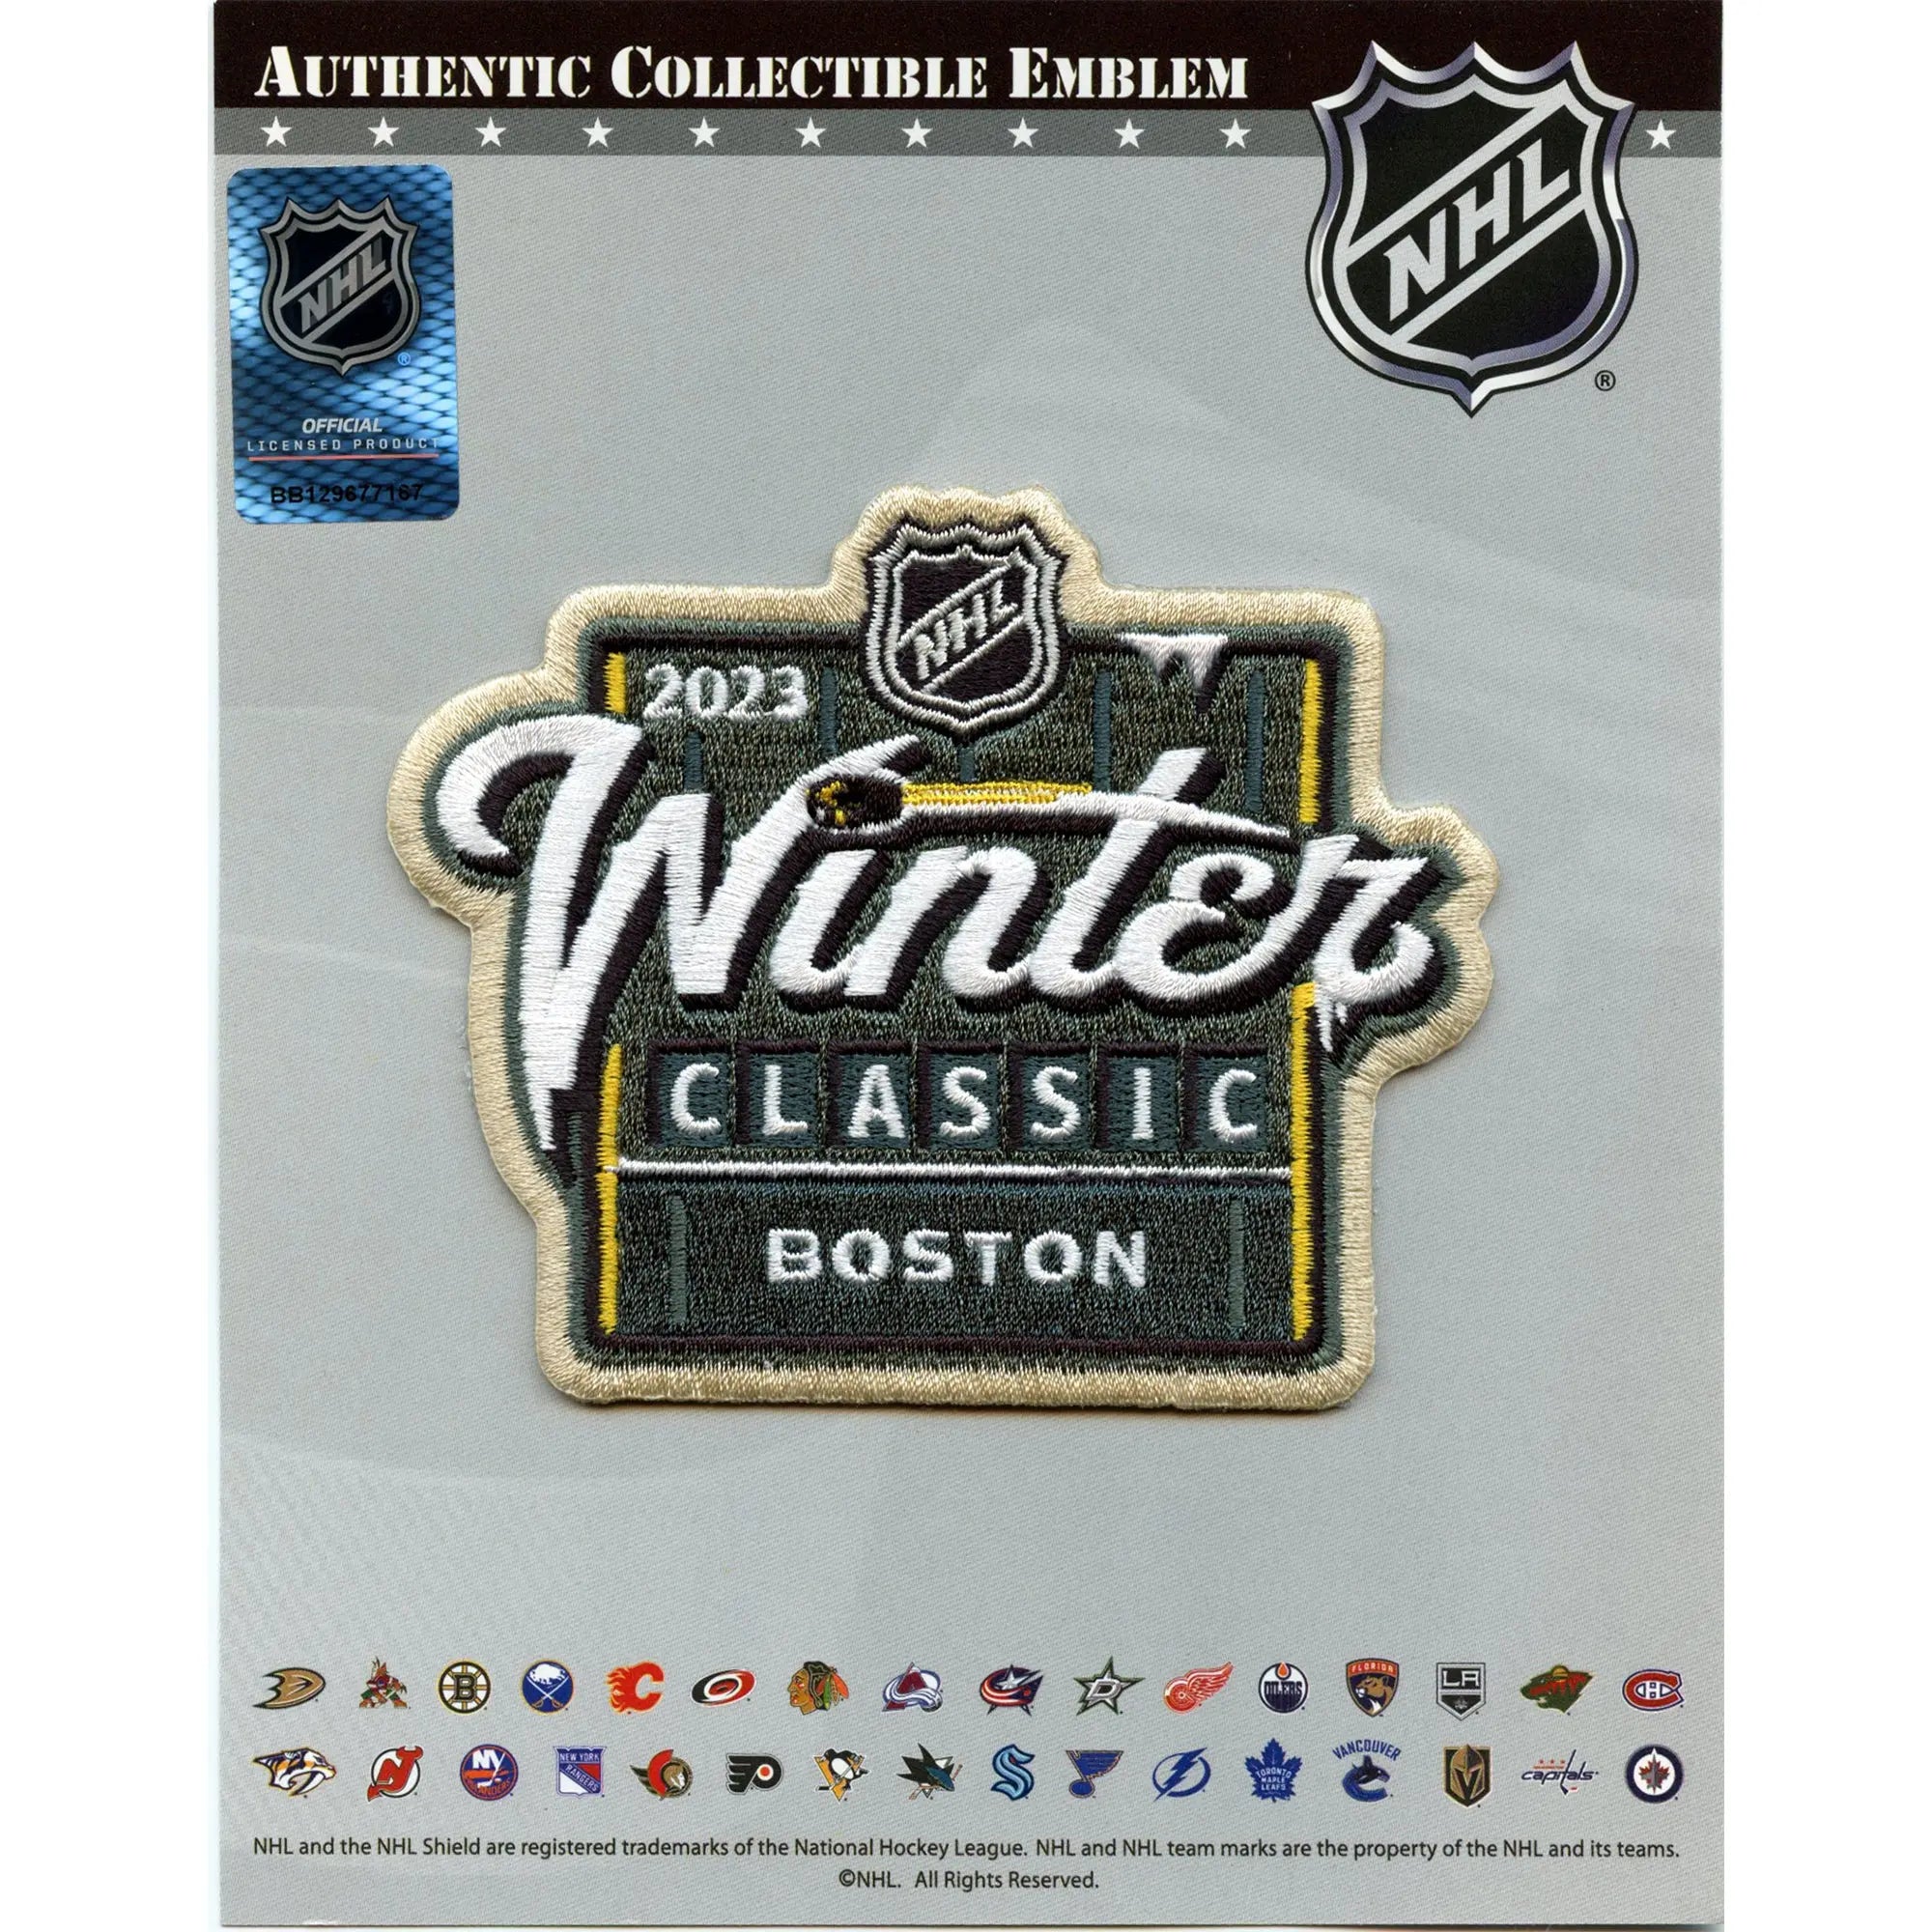 Boston Winter Classic jersey leaked, so.. where's our Penguins